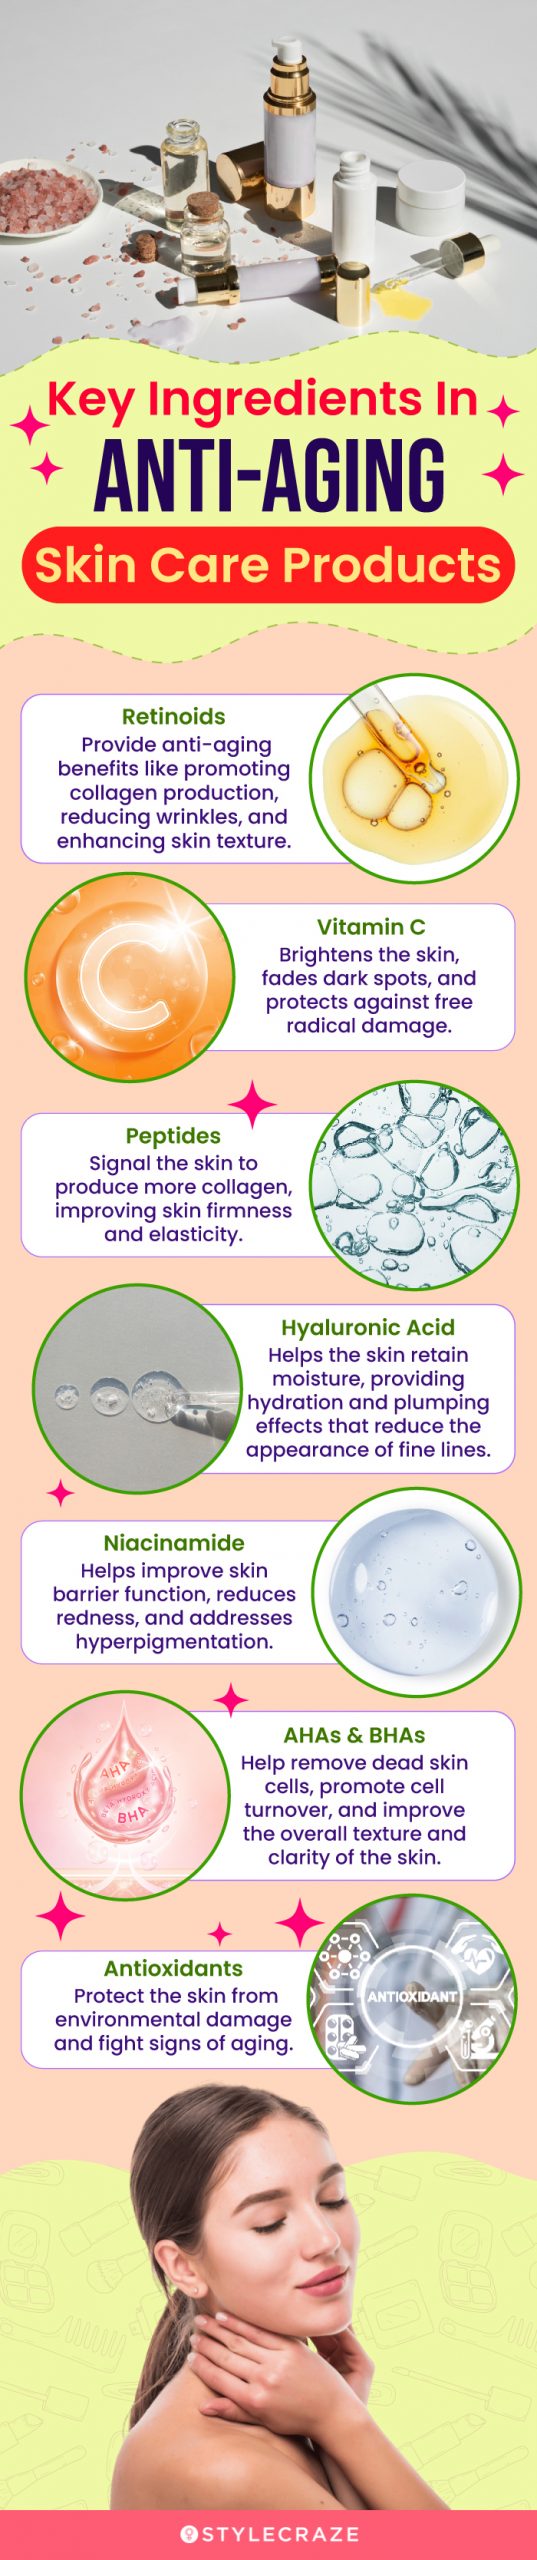 Key Ingredients In Anti-Aging Skin Care Products (infographic)